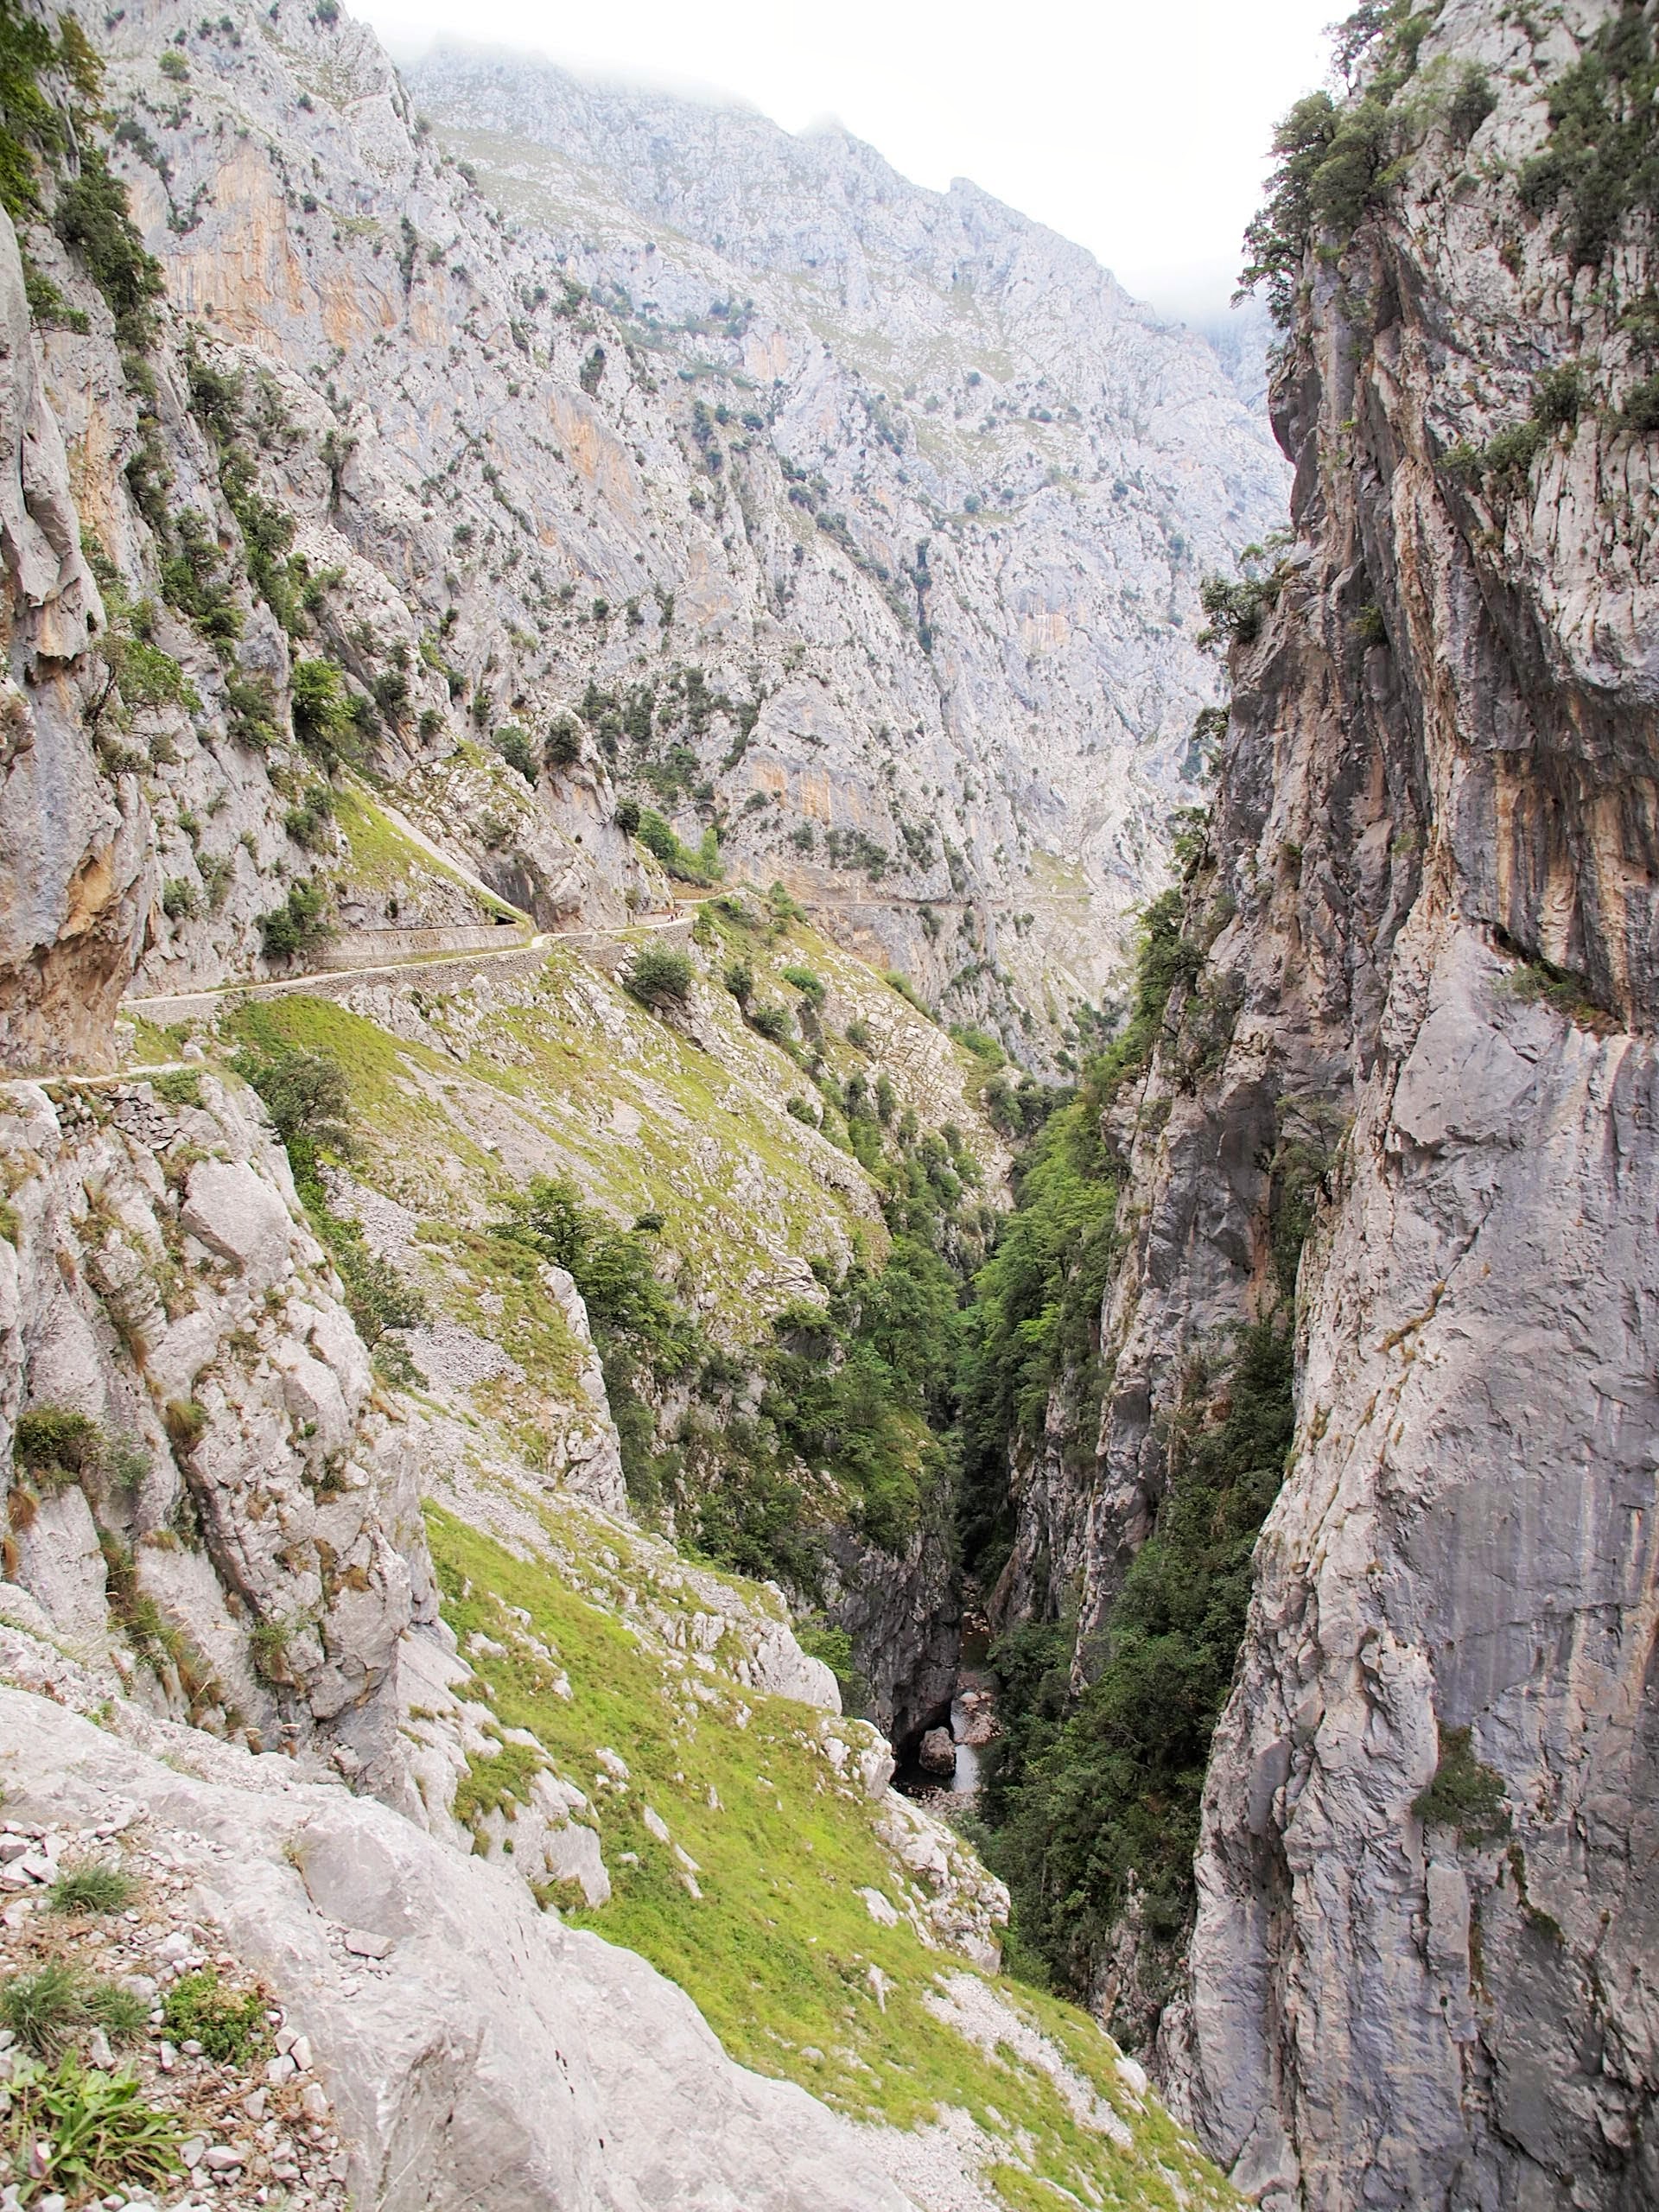 The narrow trail of Cares Gorge, carved on the cliff side